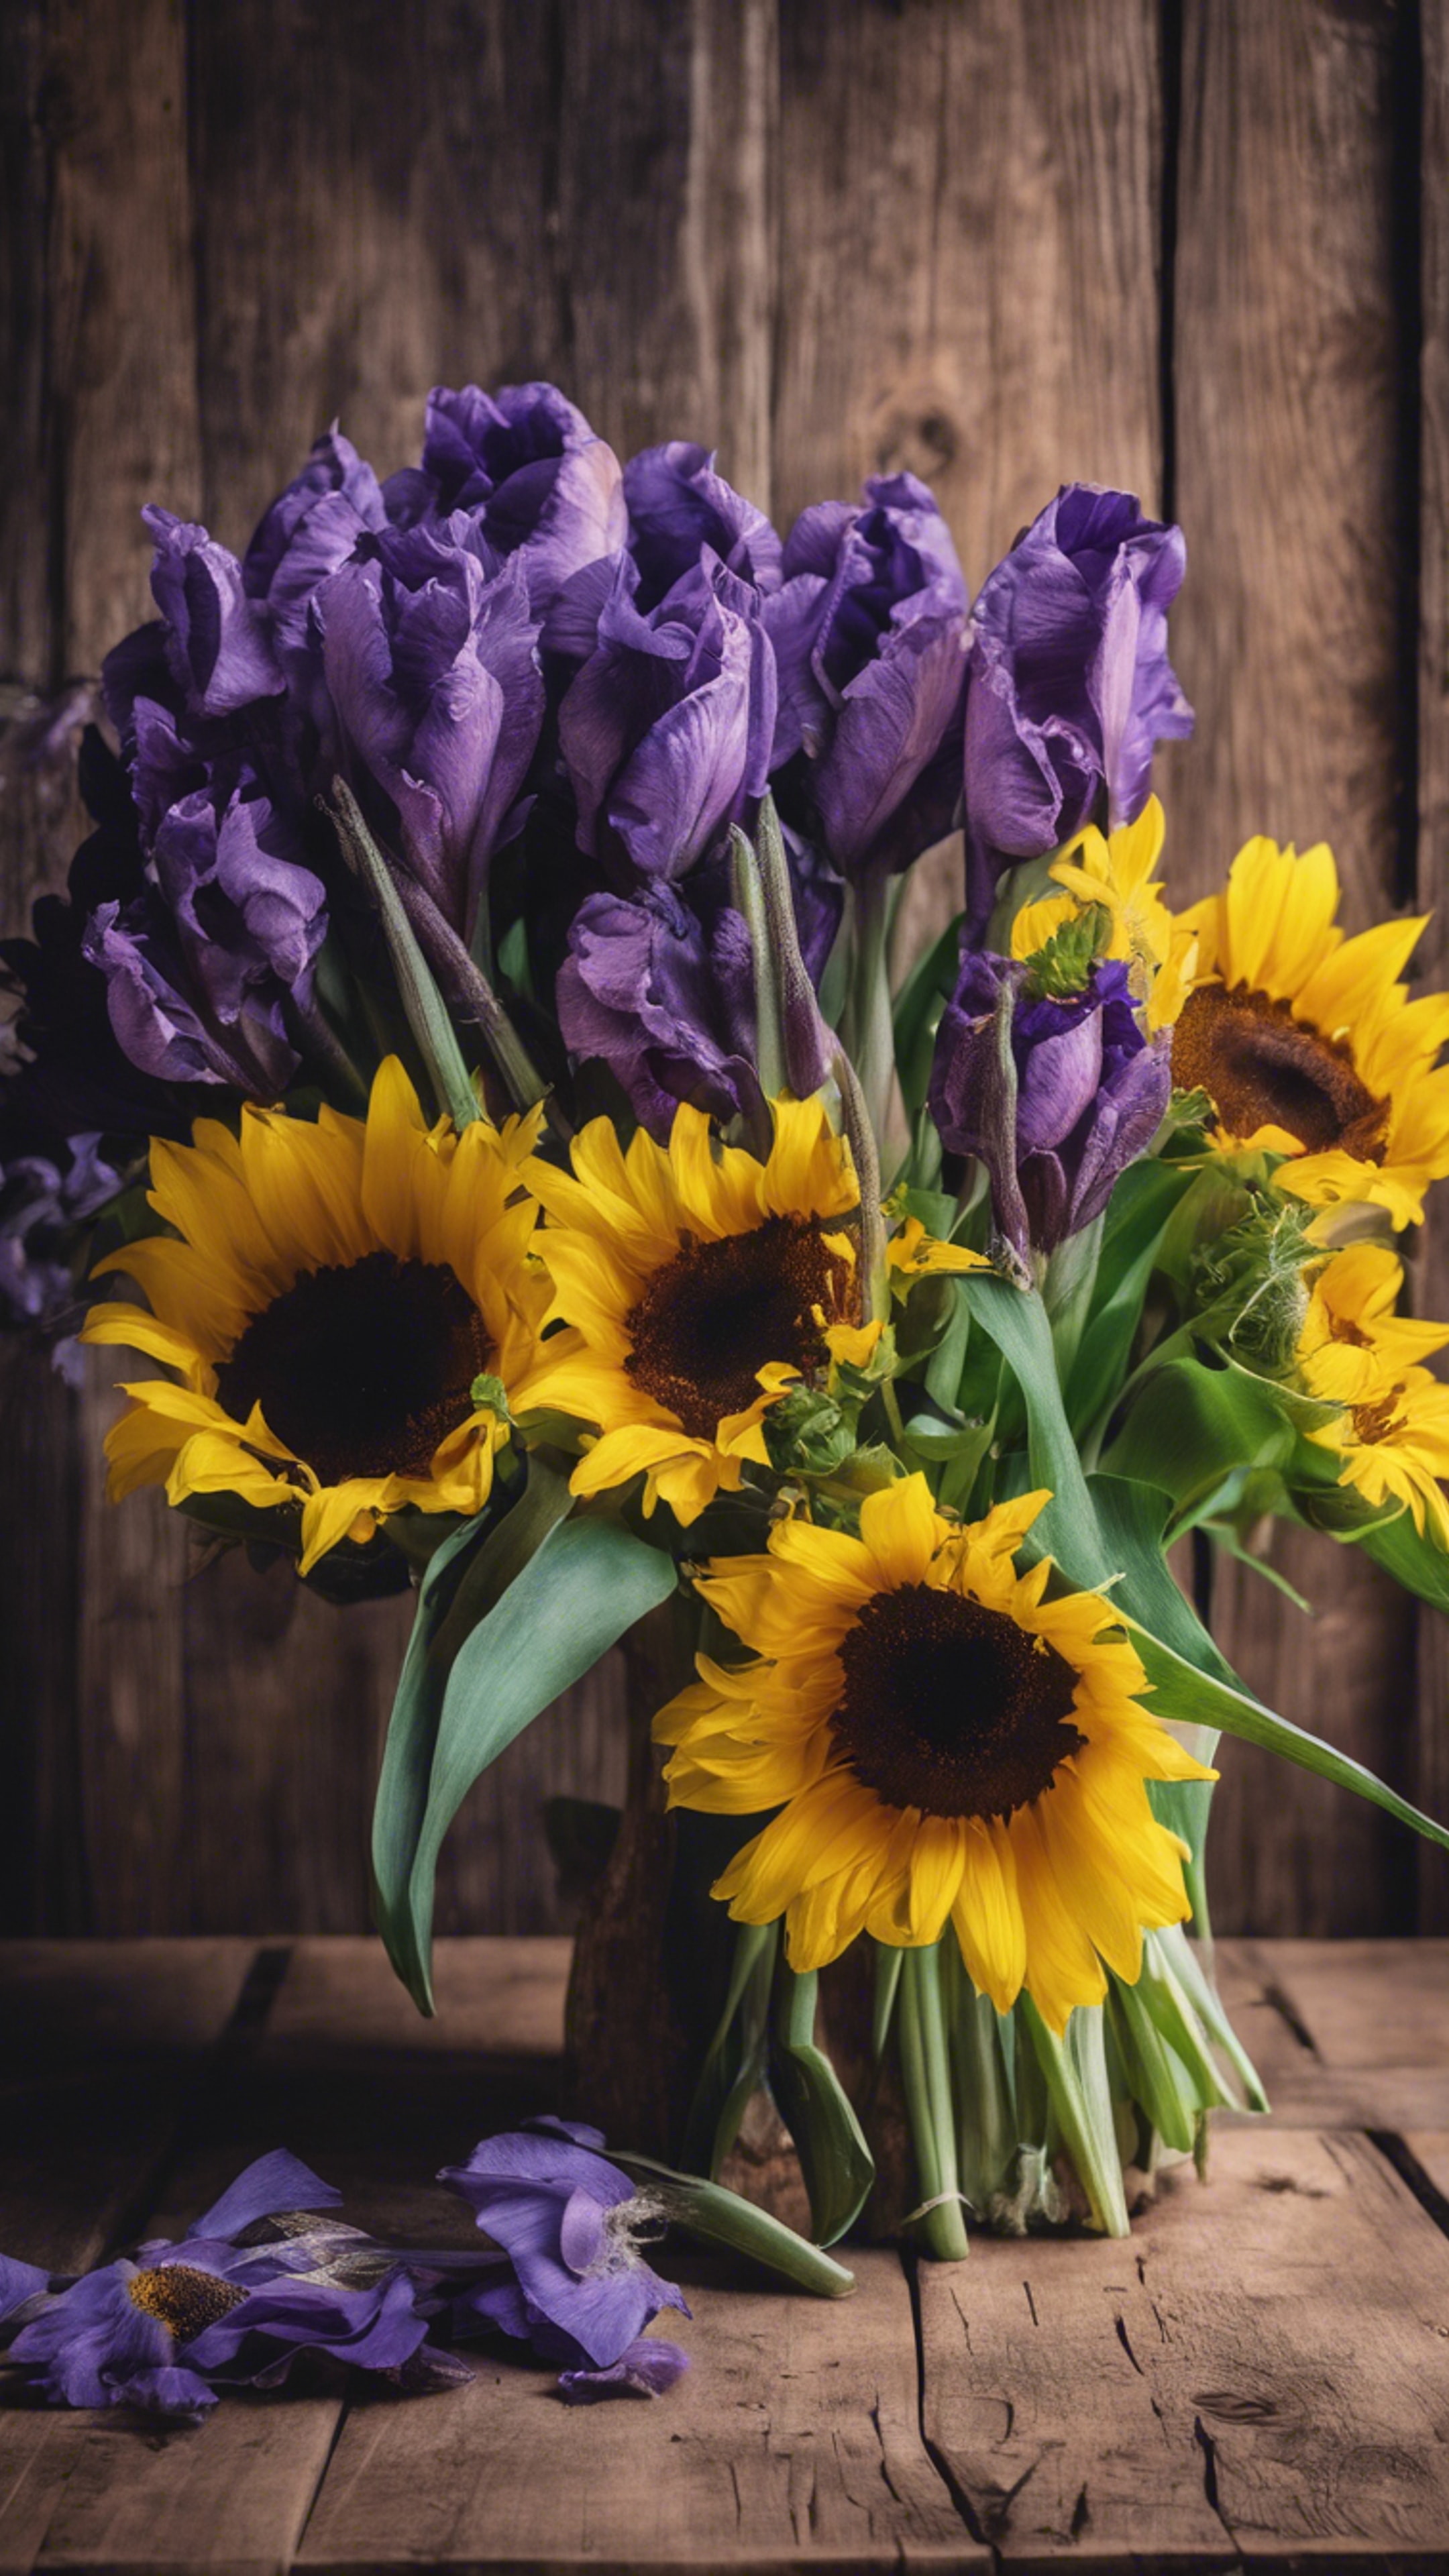 A bouquet of violet irises and bright yellow sunflowers sitting on a rustic wooden table.壁紙[036542cc0bff4a9eafa2]